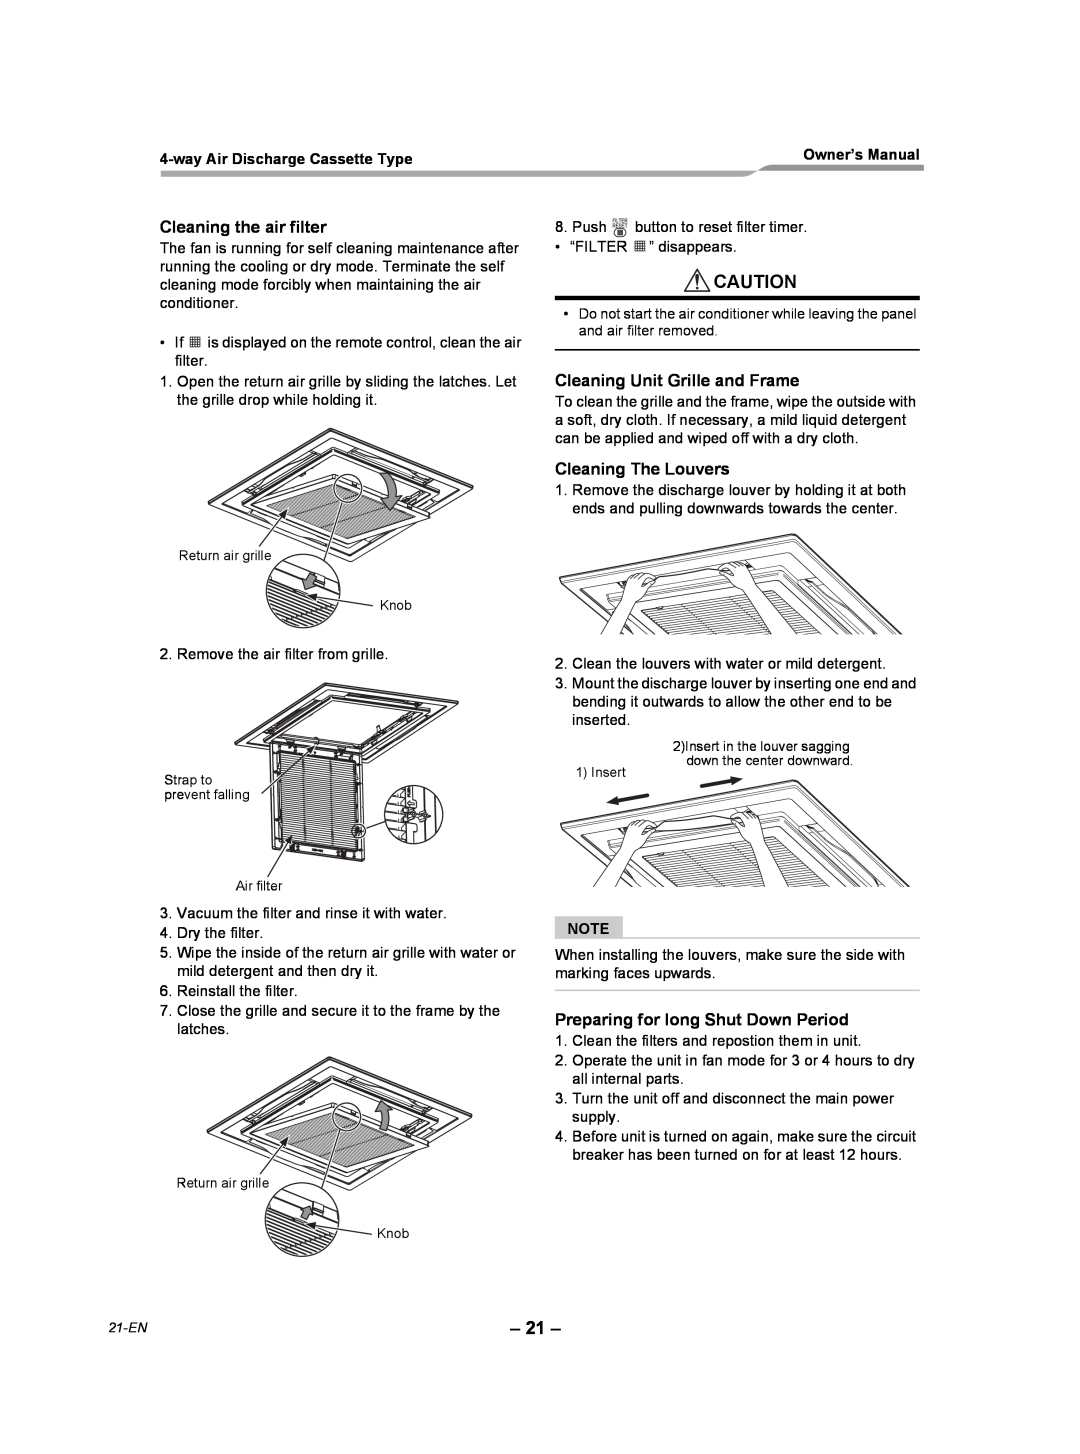 Toshiba RAV-SP240UT-UL, RAV-SP420UT-UL Cleaning the air filter, Cleaning Unit Grille and Frame, Cleaning The Louvers 